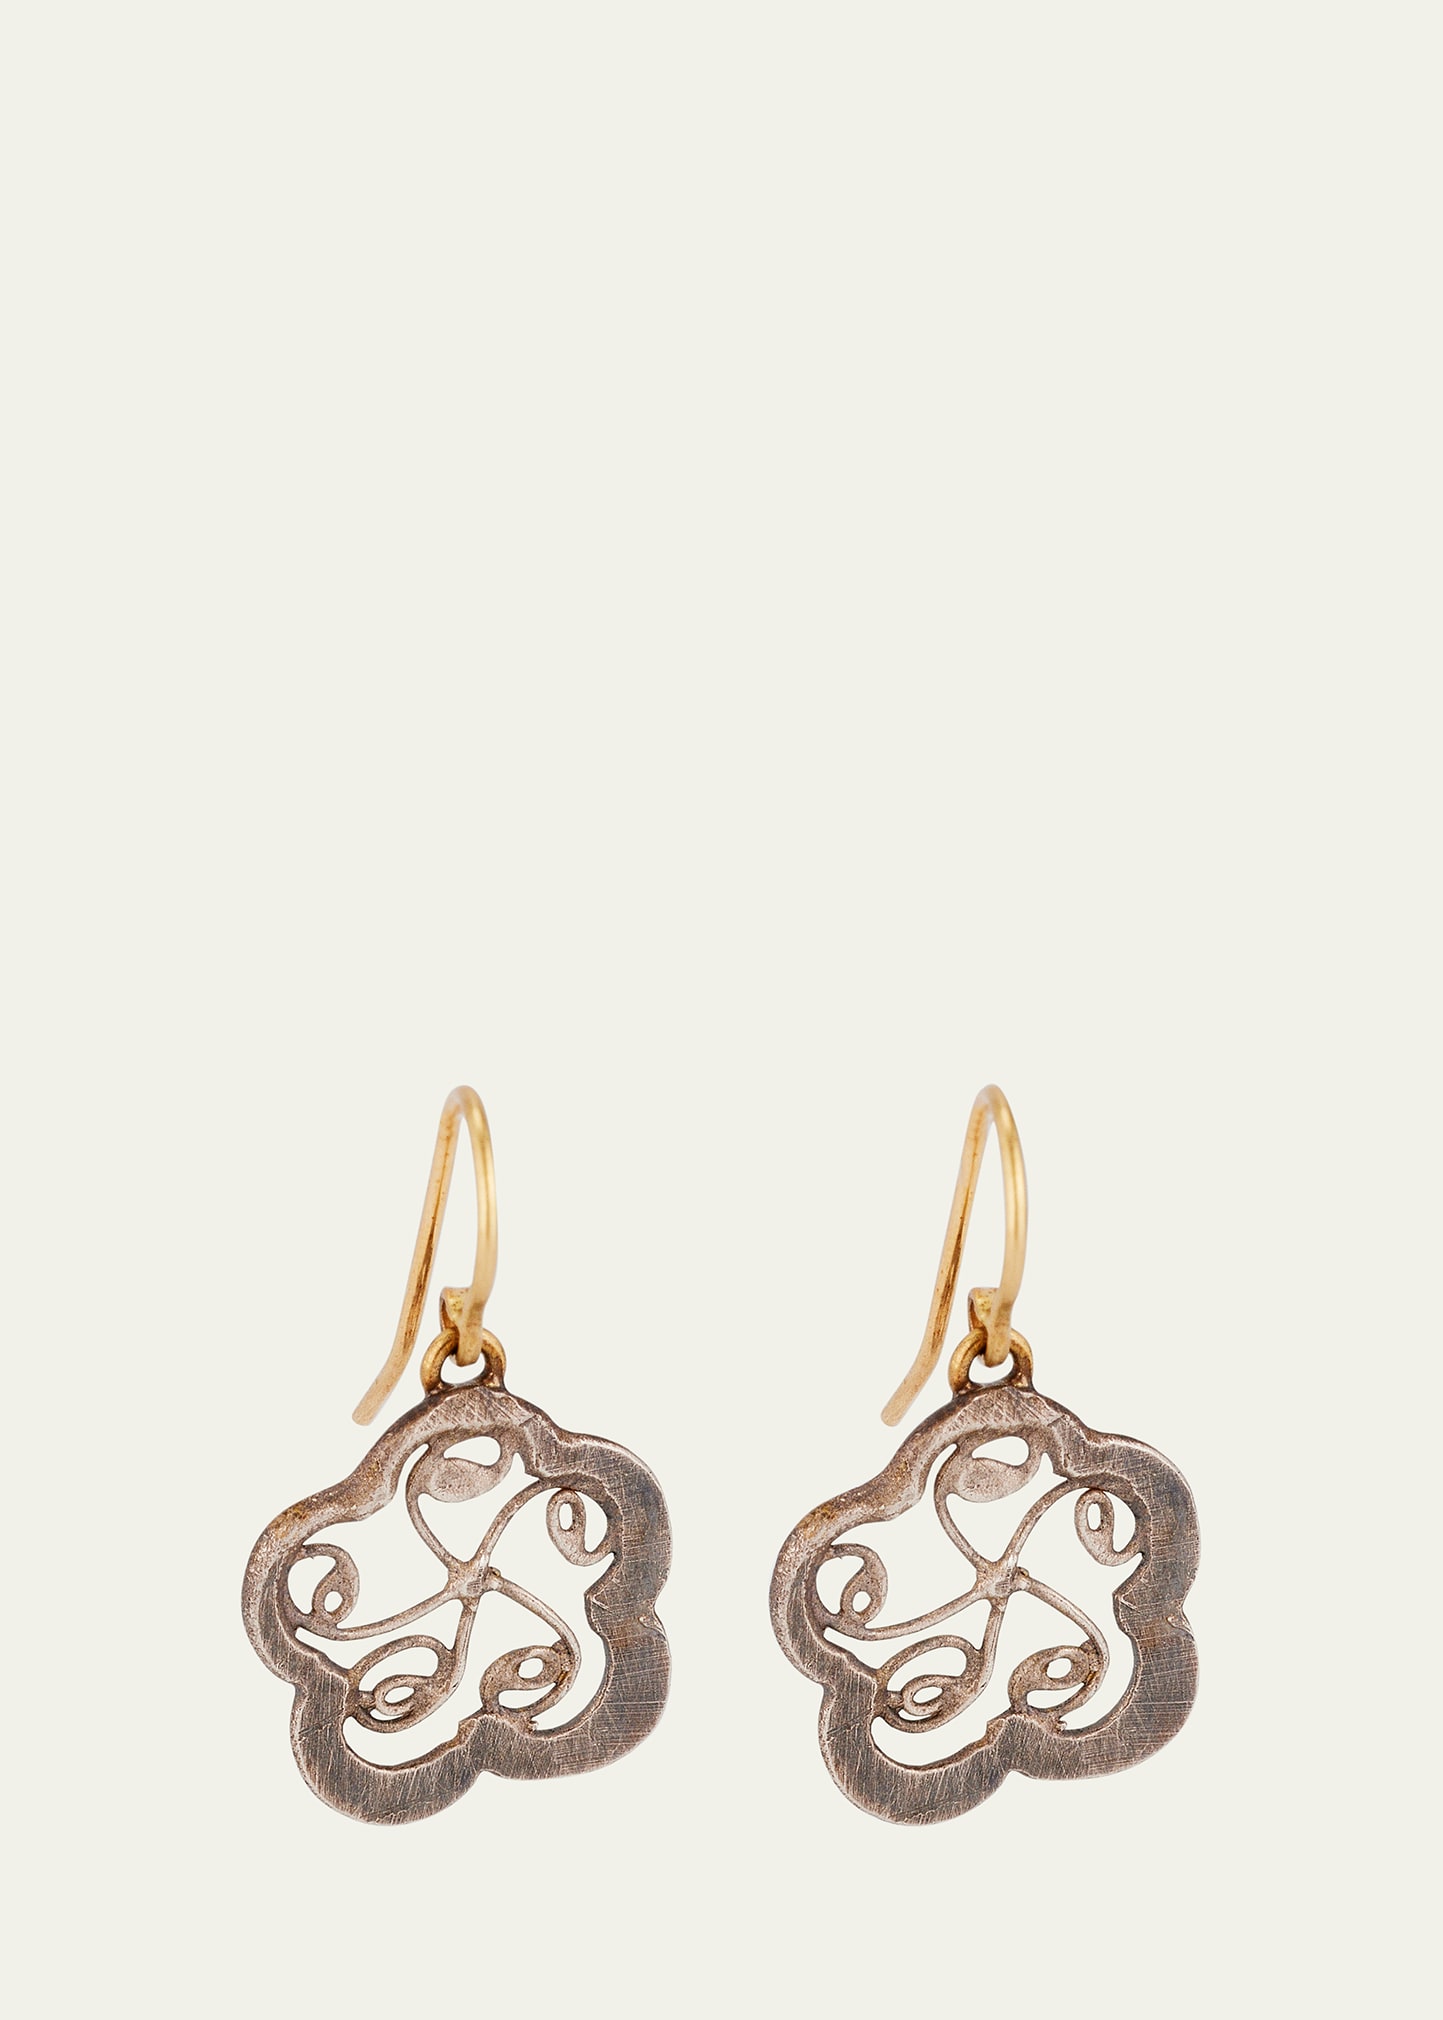 18K Gold and Silver Dangly Flower Earrings